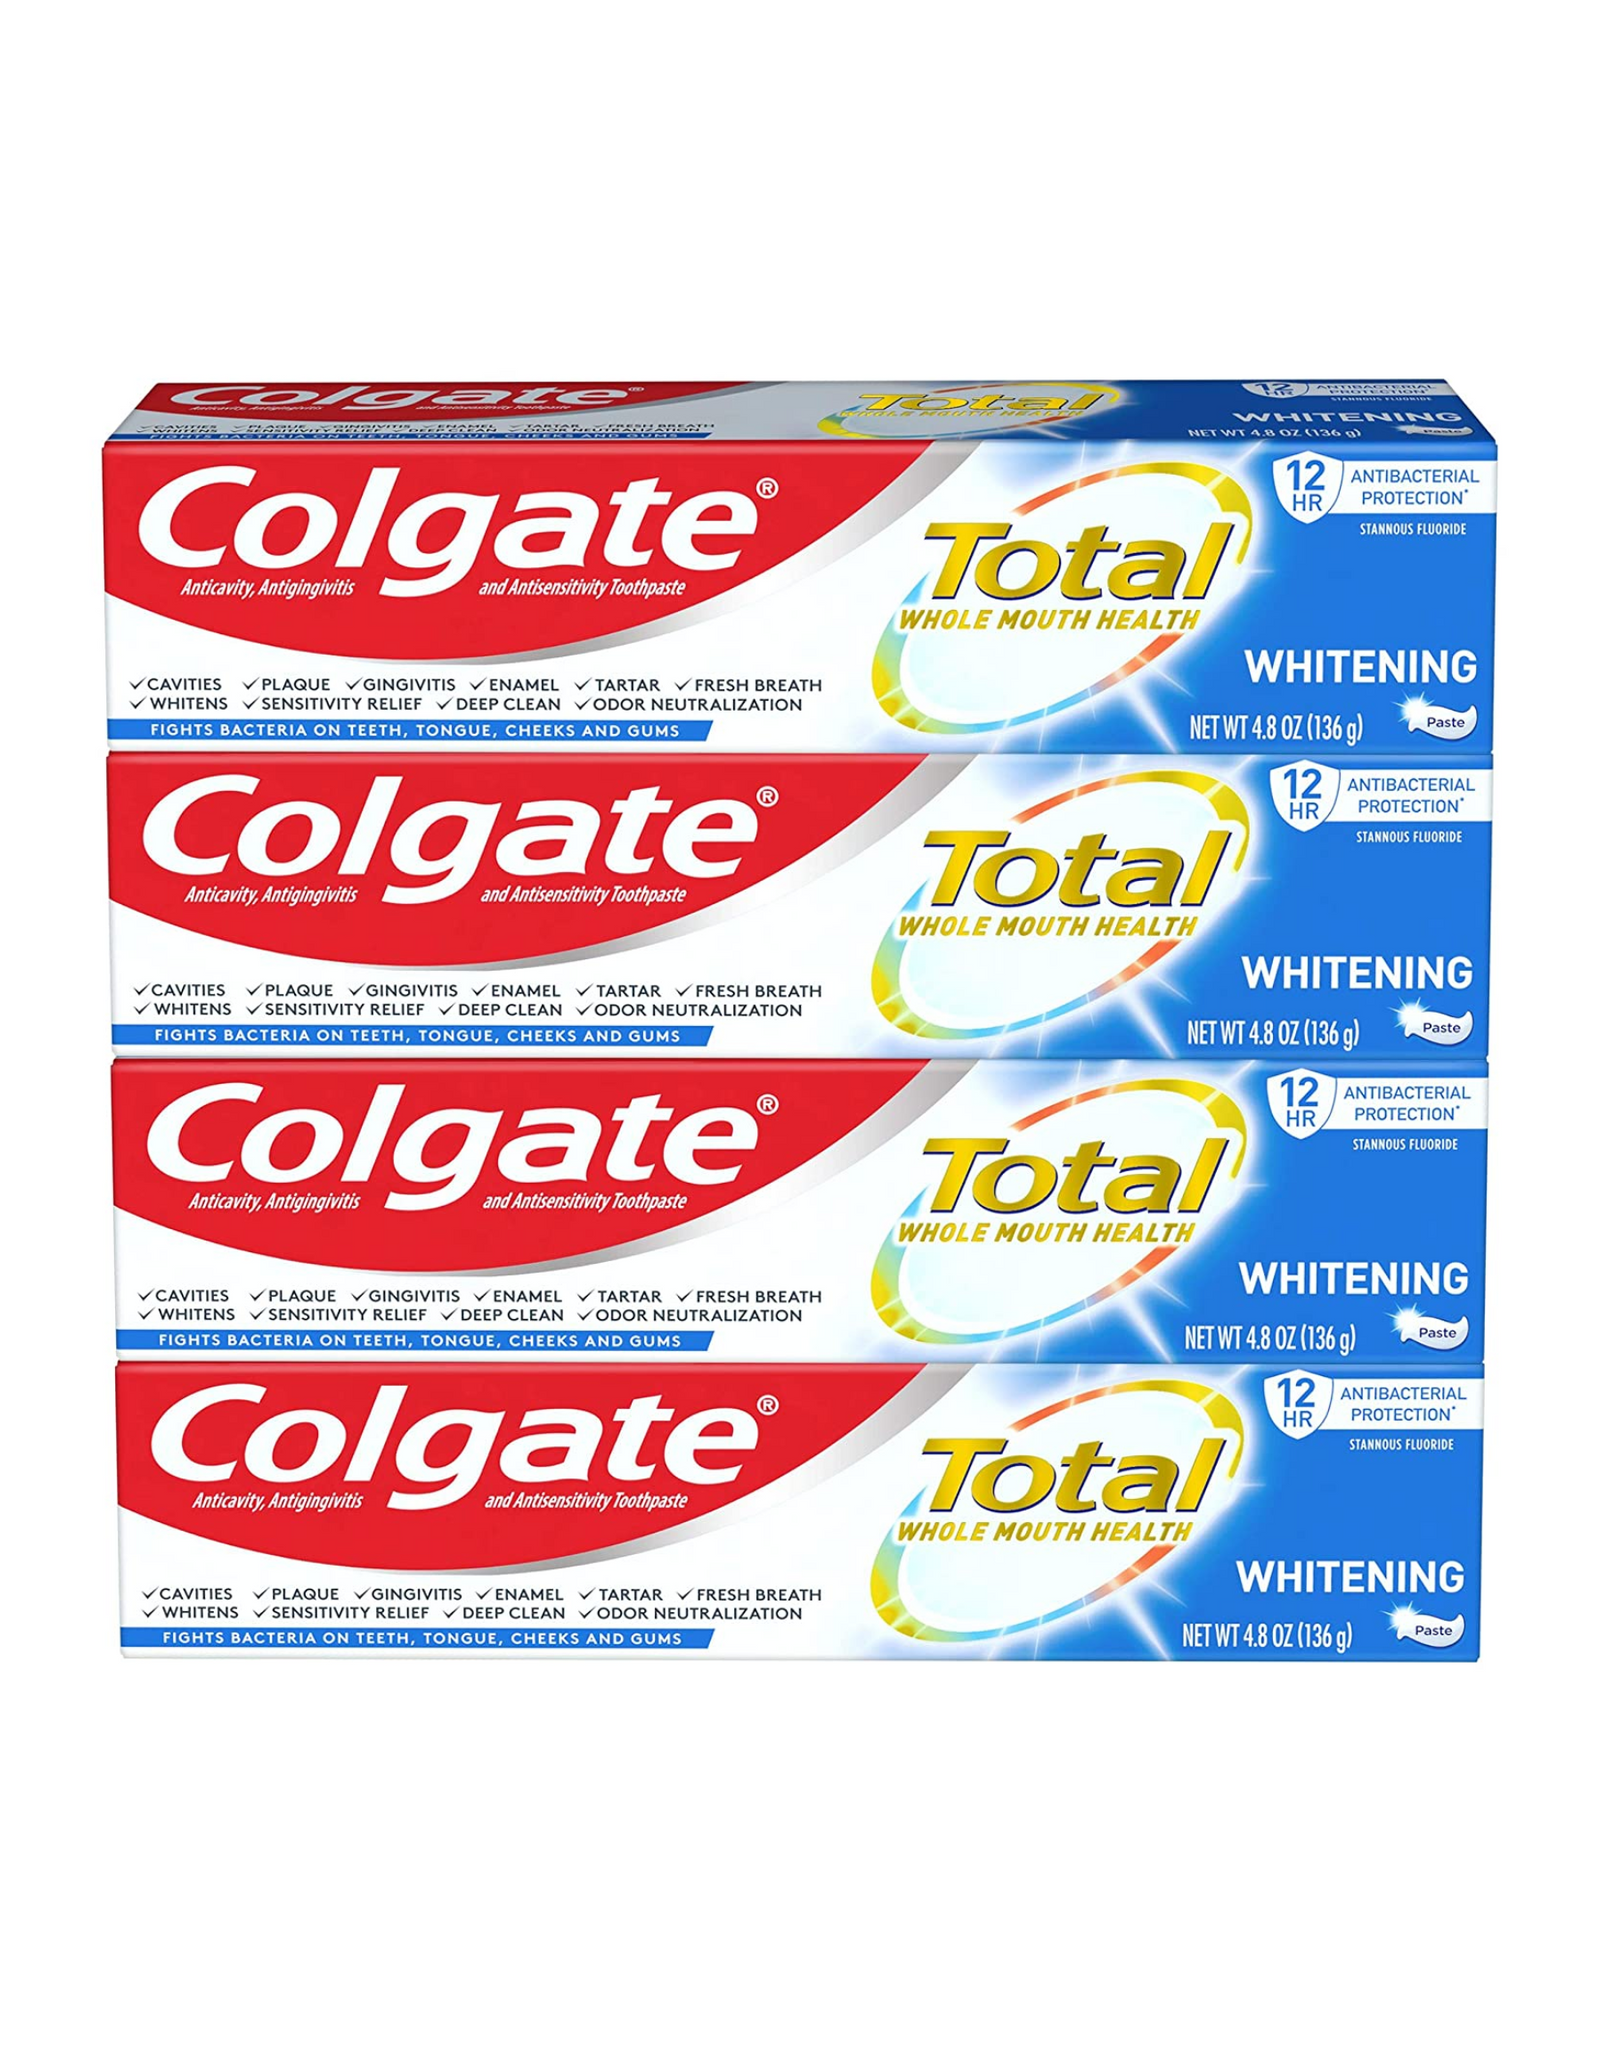 Colgate Total Teeth Whitening Toothpaste, Fights Bacteria on Teeth, Tongue, Cheeks, and Gums, 4.8 oz each (Pack of 4)